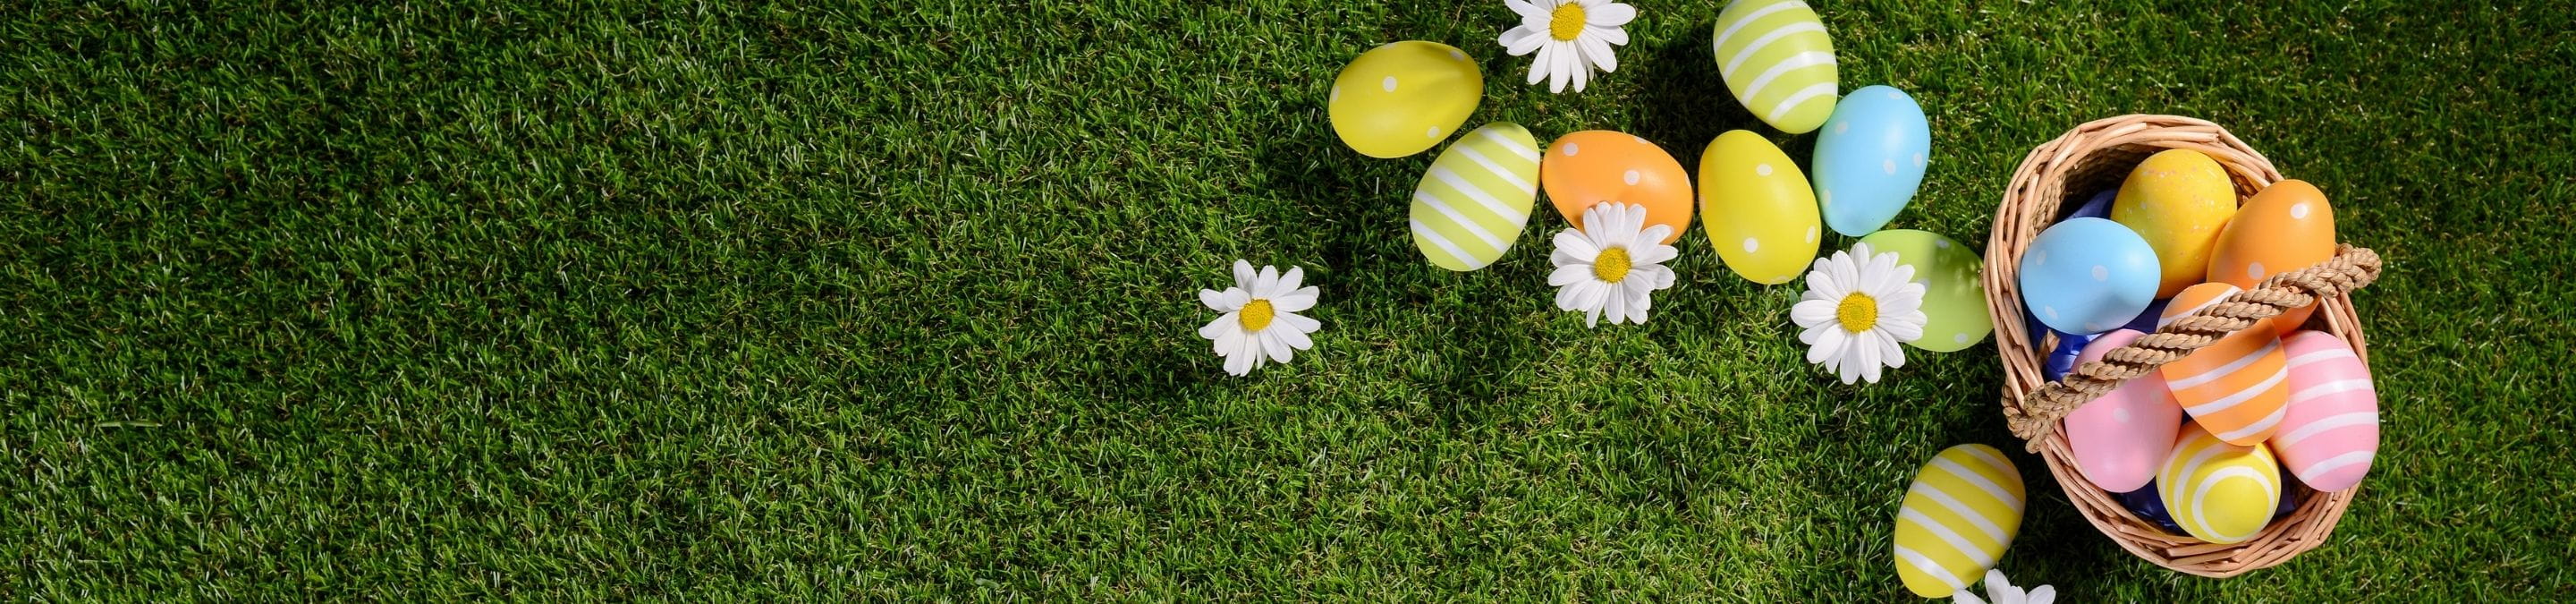 a basket of colourful Easter eggs with some other eggs scattered on the grass